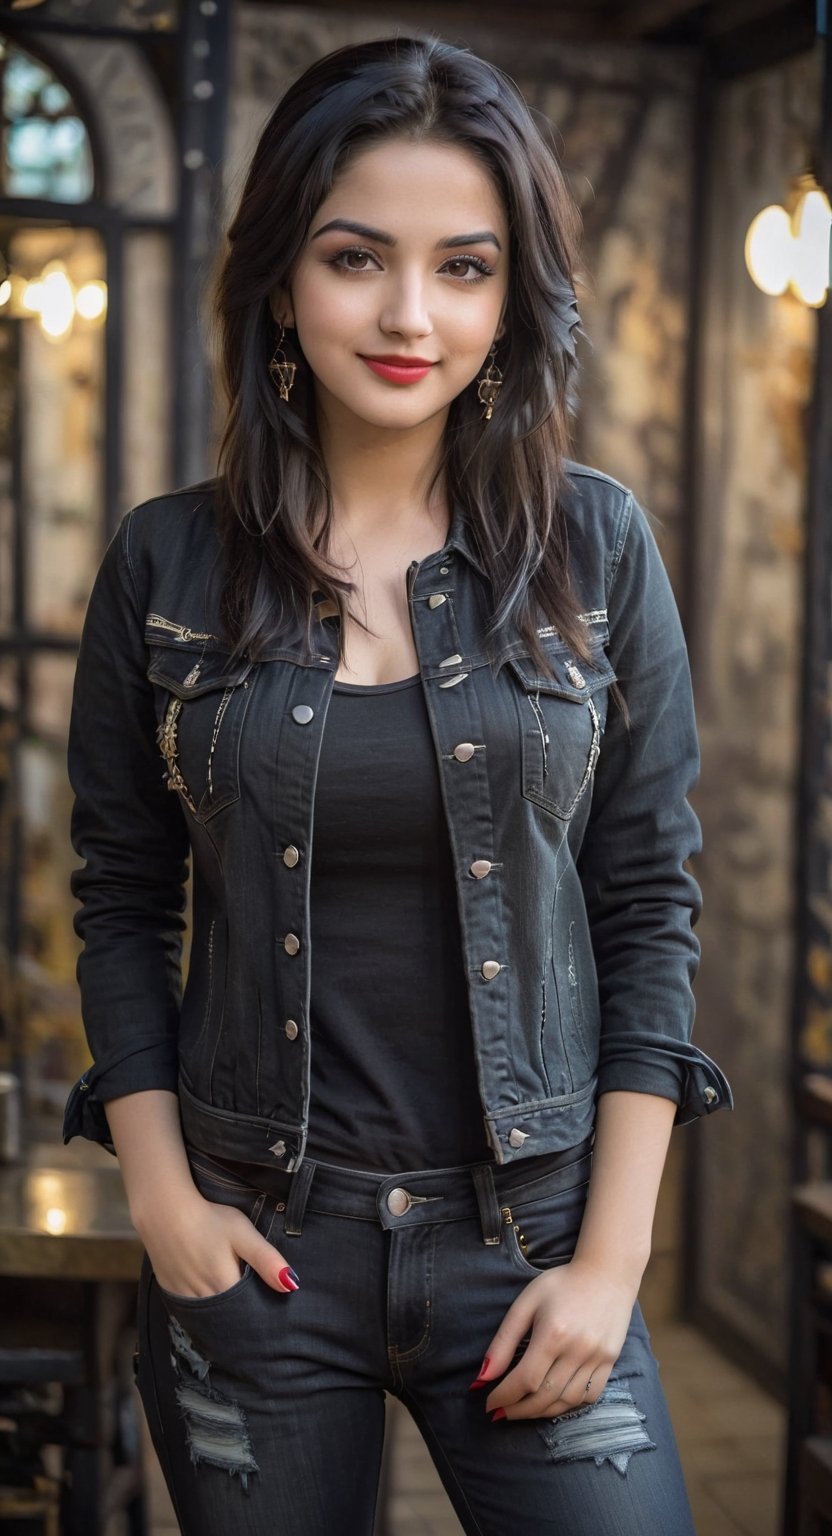 A 18  years young girl wearing denim black jacket and pant, cute face with details, beautiful black eyes, black long hair, smile 0.1, lipstick, earrings, model photoshot, high quality realistic photo,HZ Steampunk, different pose,YamiGautam